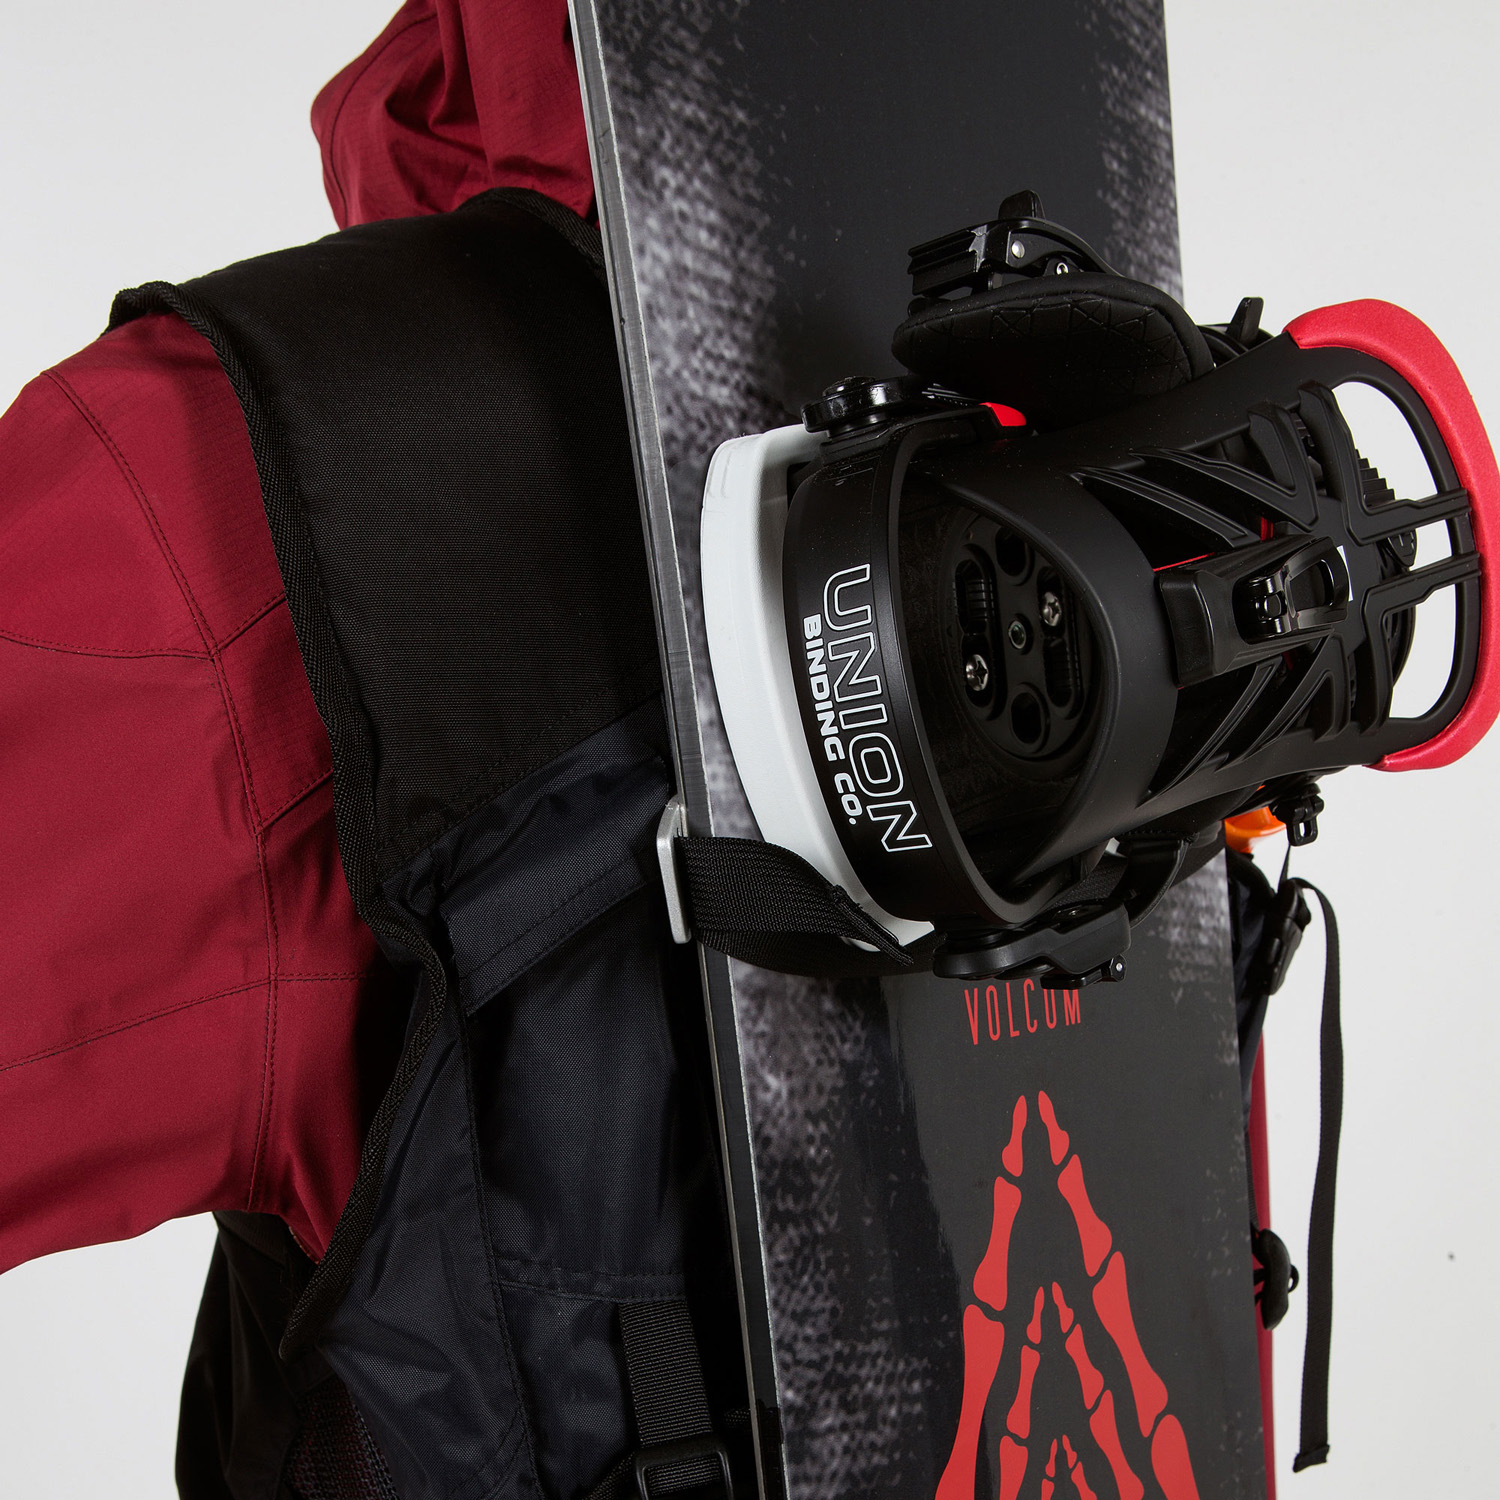 Easy to hike with a snowboard strap without a backpack